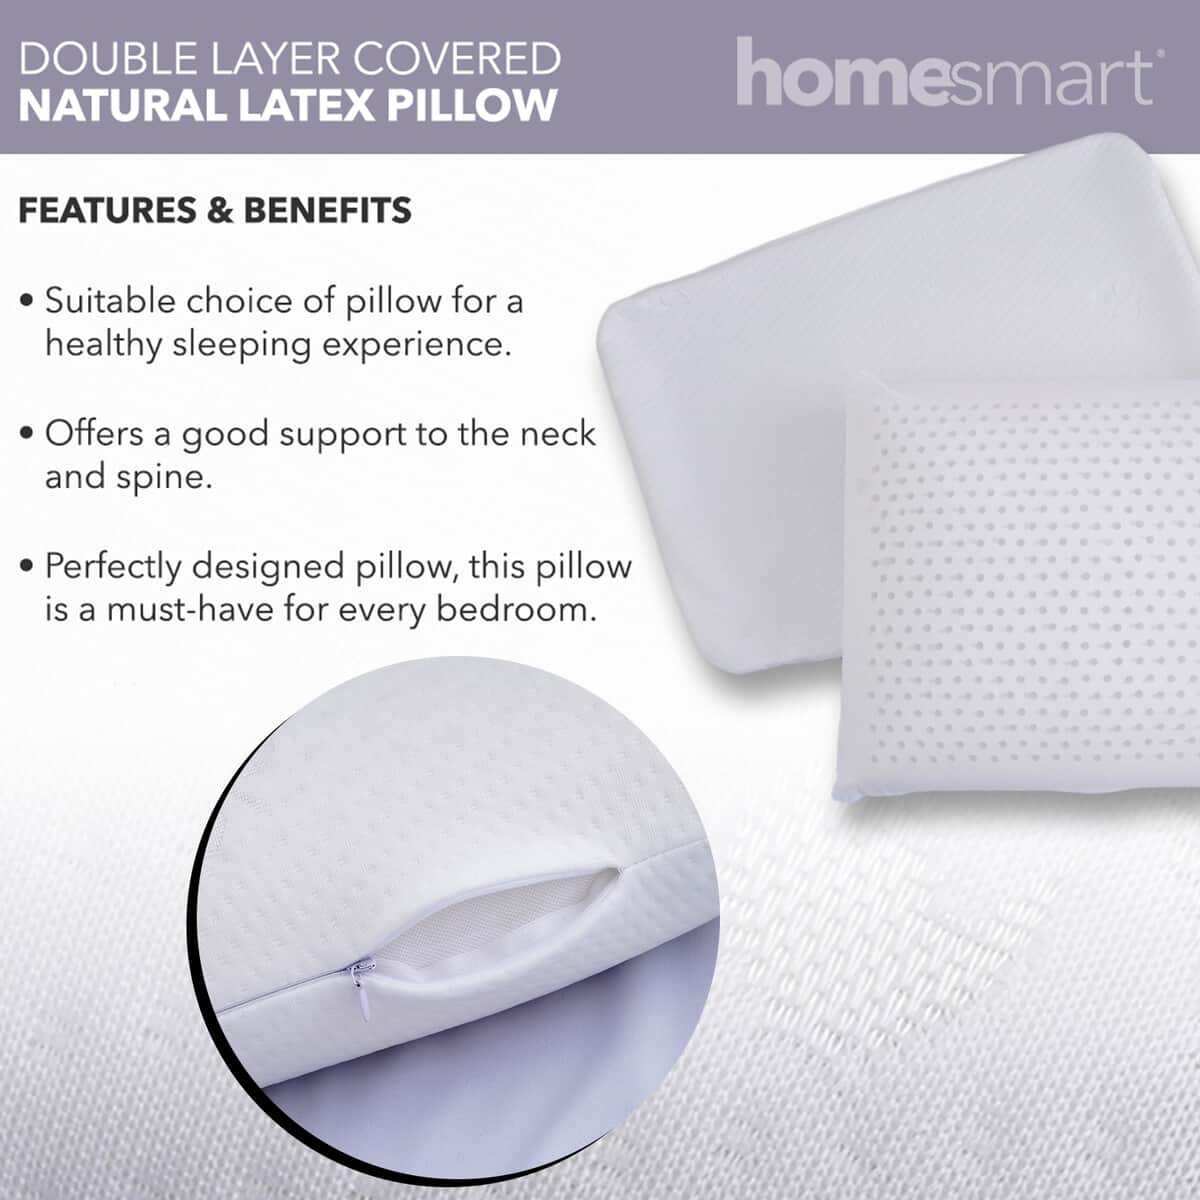 Homesmart Double Layer Covered Natural Latex Pillow image number 1